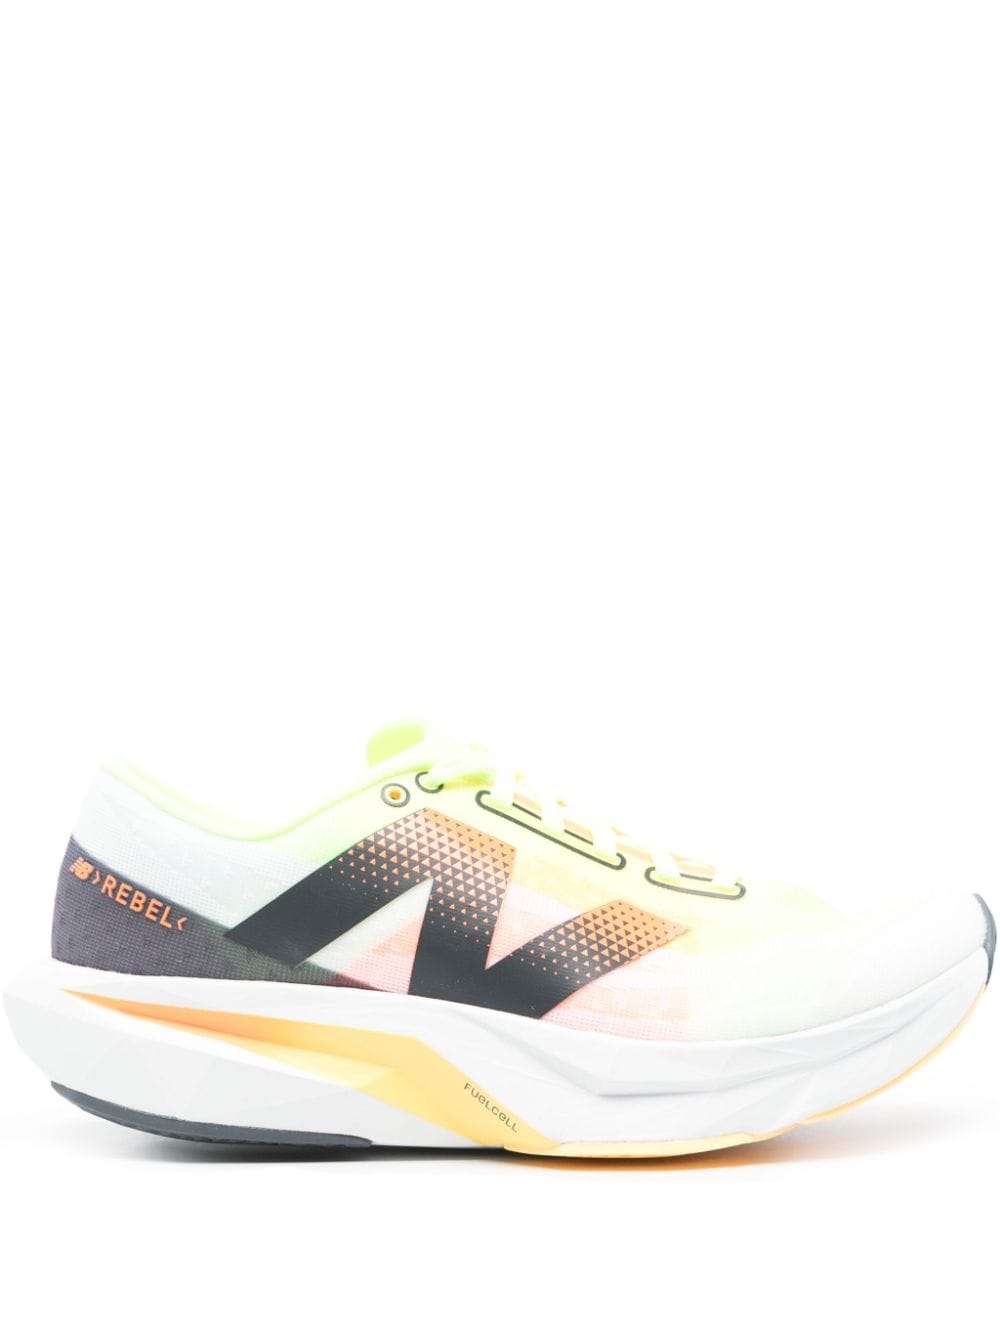 New Balance FuelCell Rebel v4 running sneakers - White von New Balance